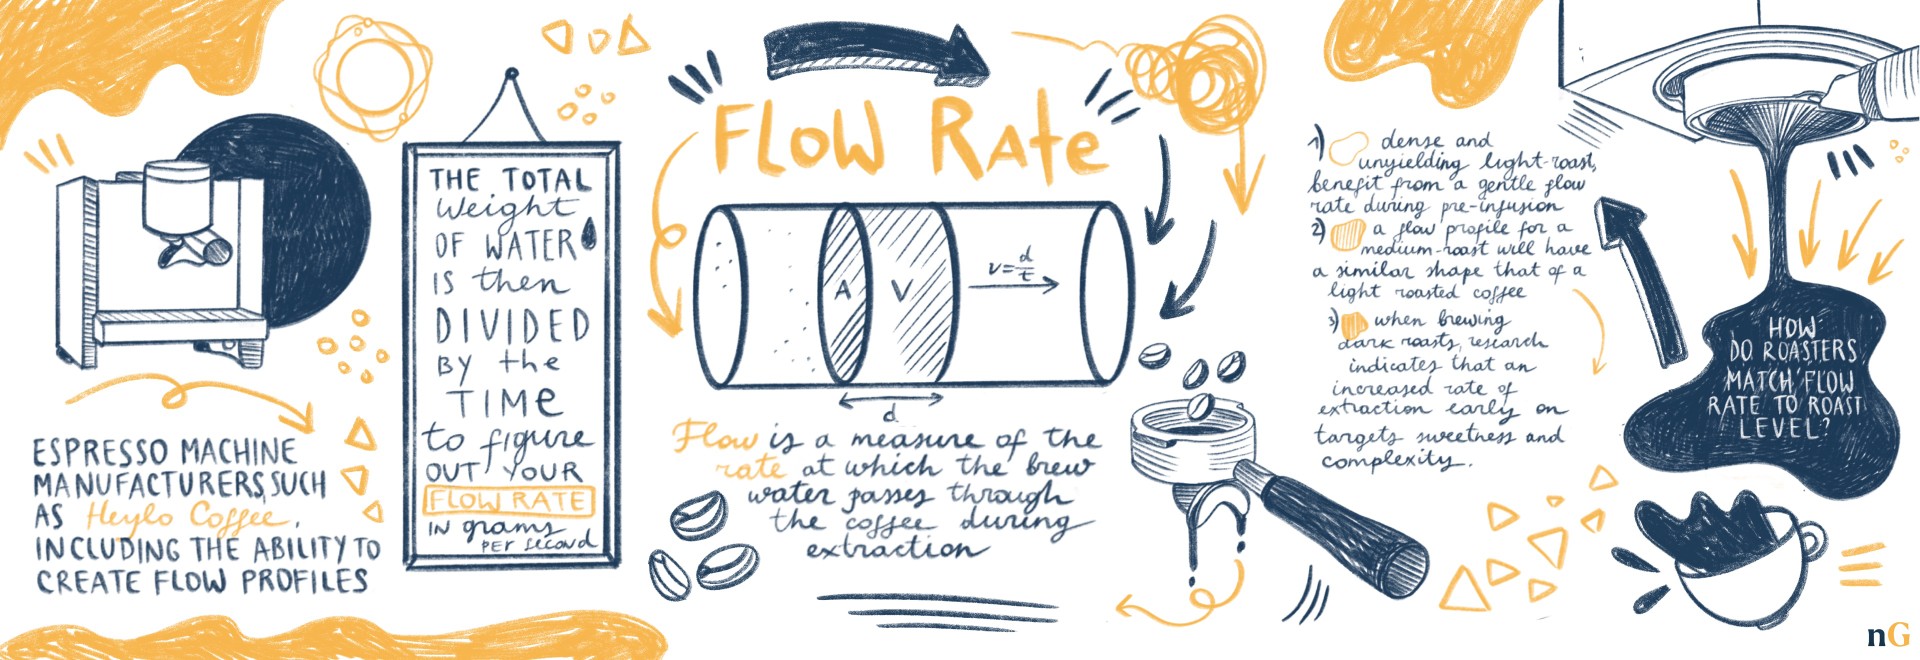 flow rate for espresso